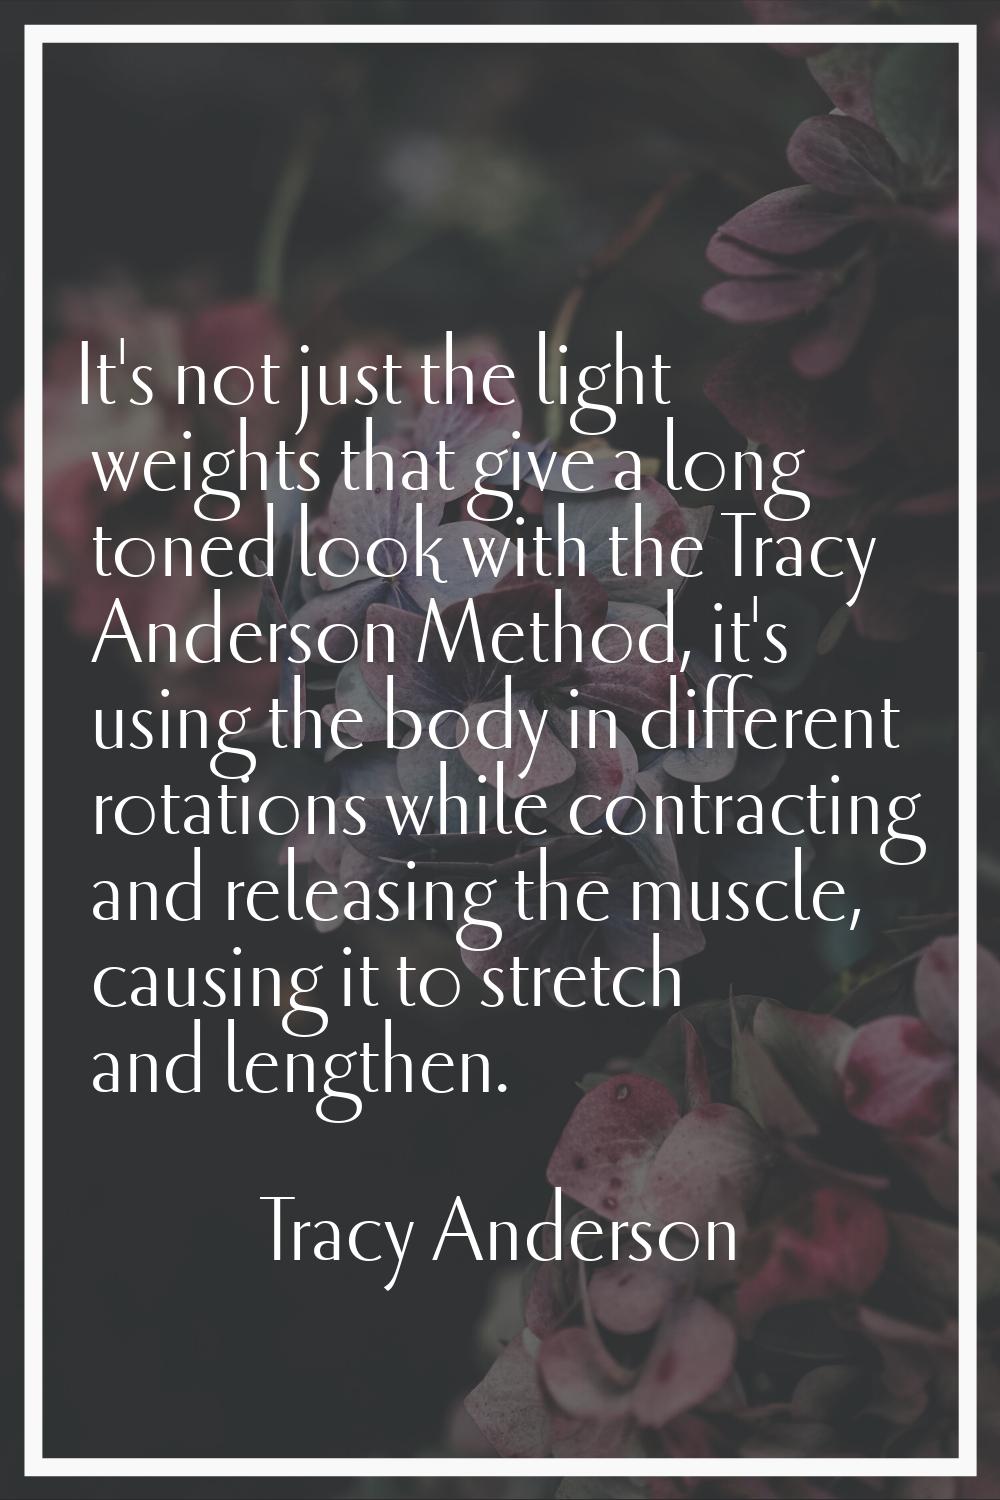 It's not just the light weights that give a long toned look with the Tracy Anderson Method, it's us